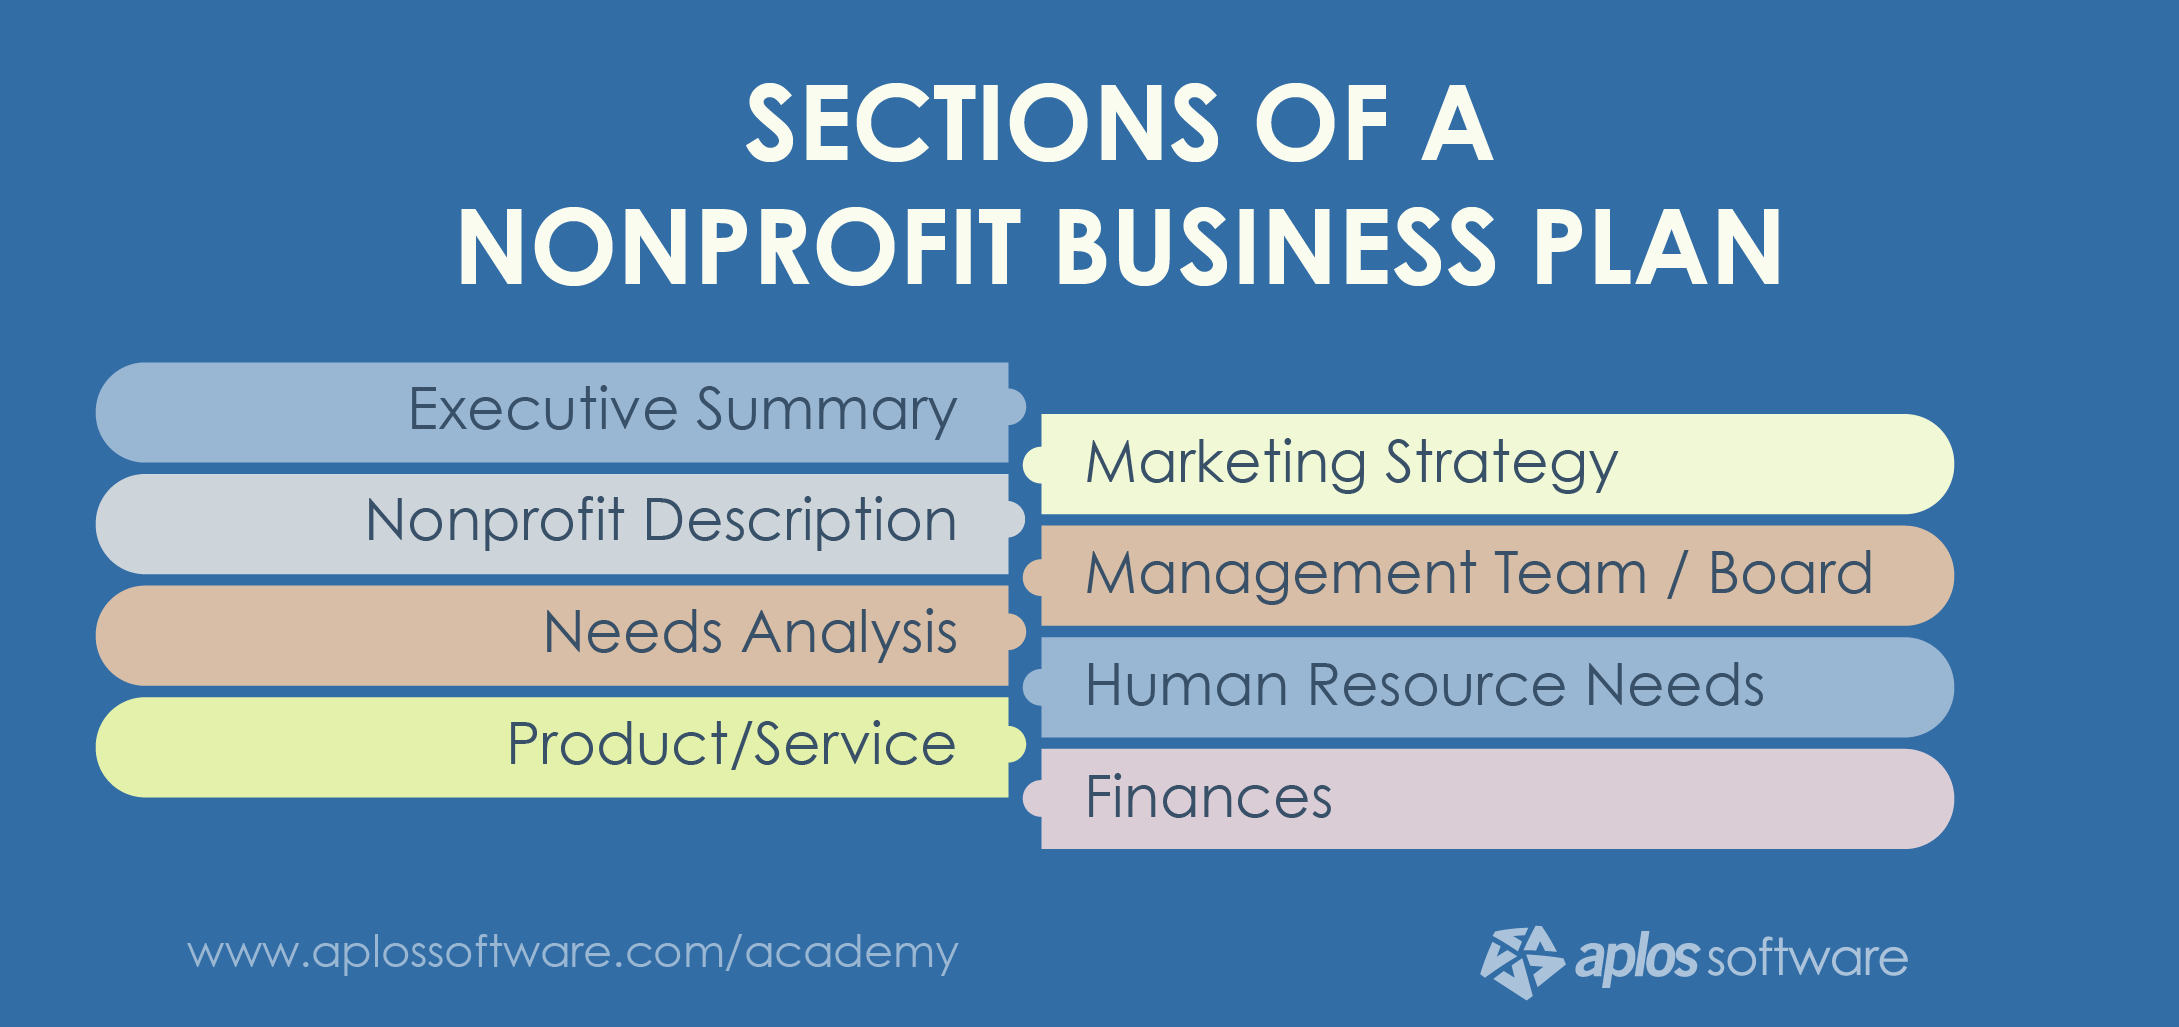 How To Write A Nonprofit Business Plan → Human Resources In A Nonprofit  Business Plan - Aplos Training Center